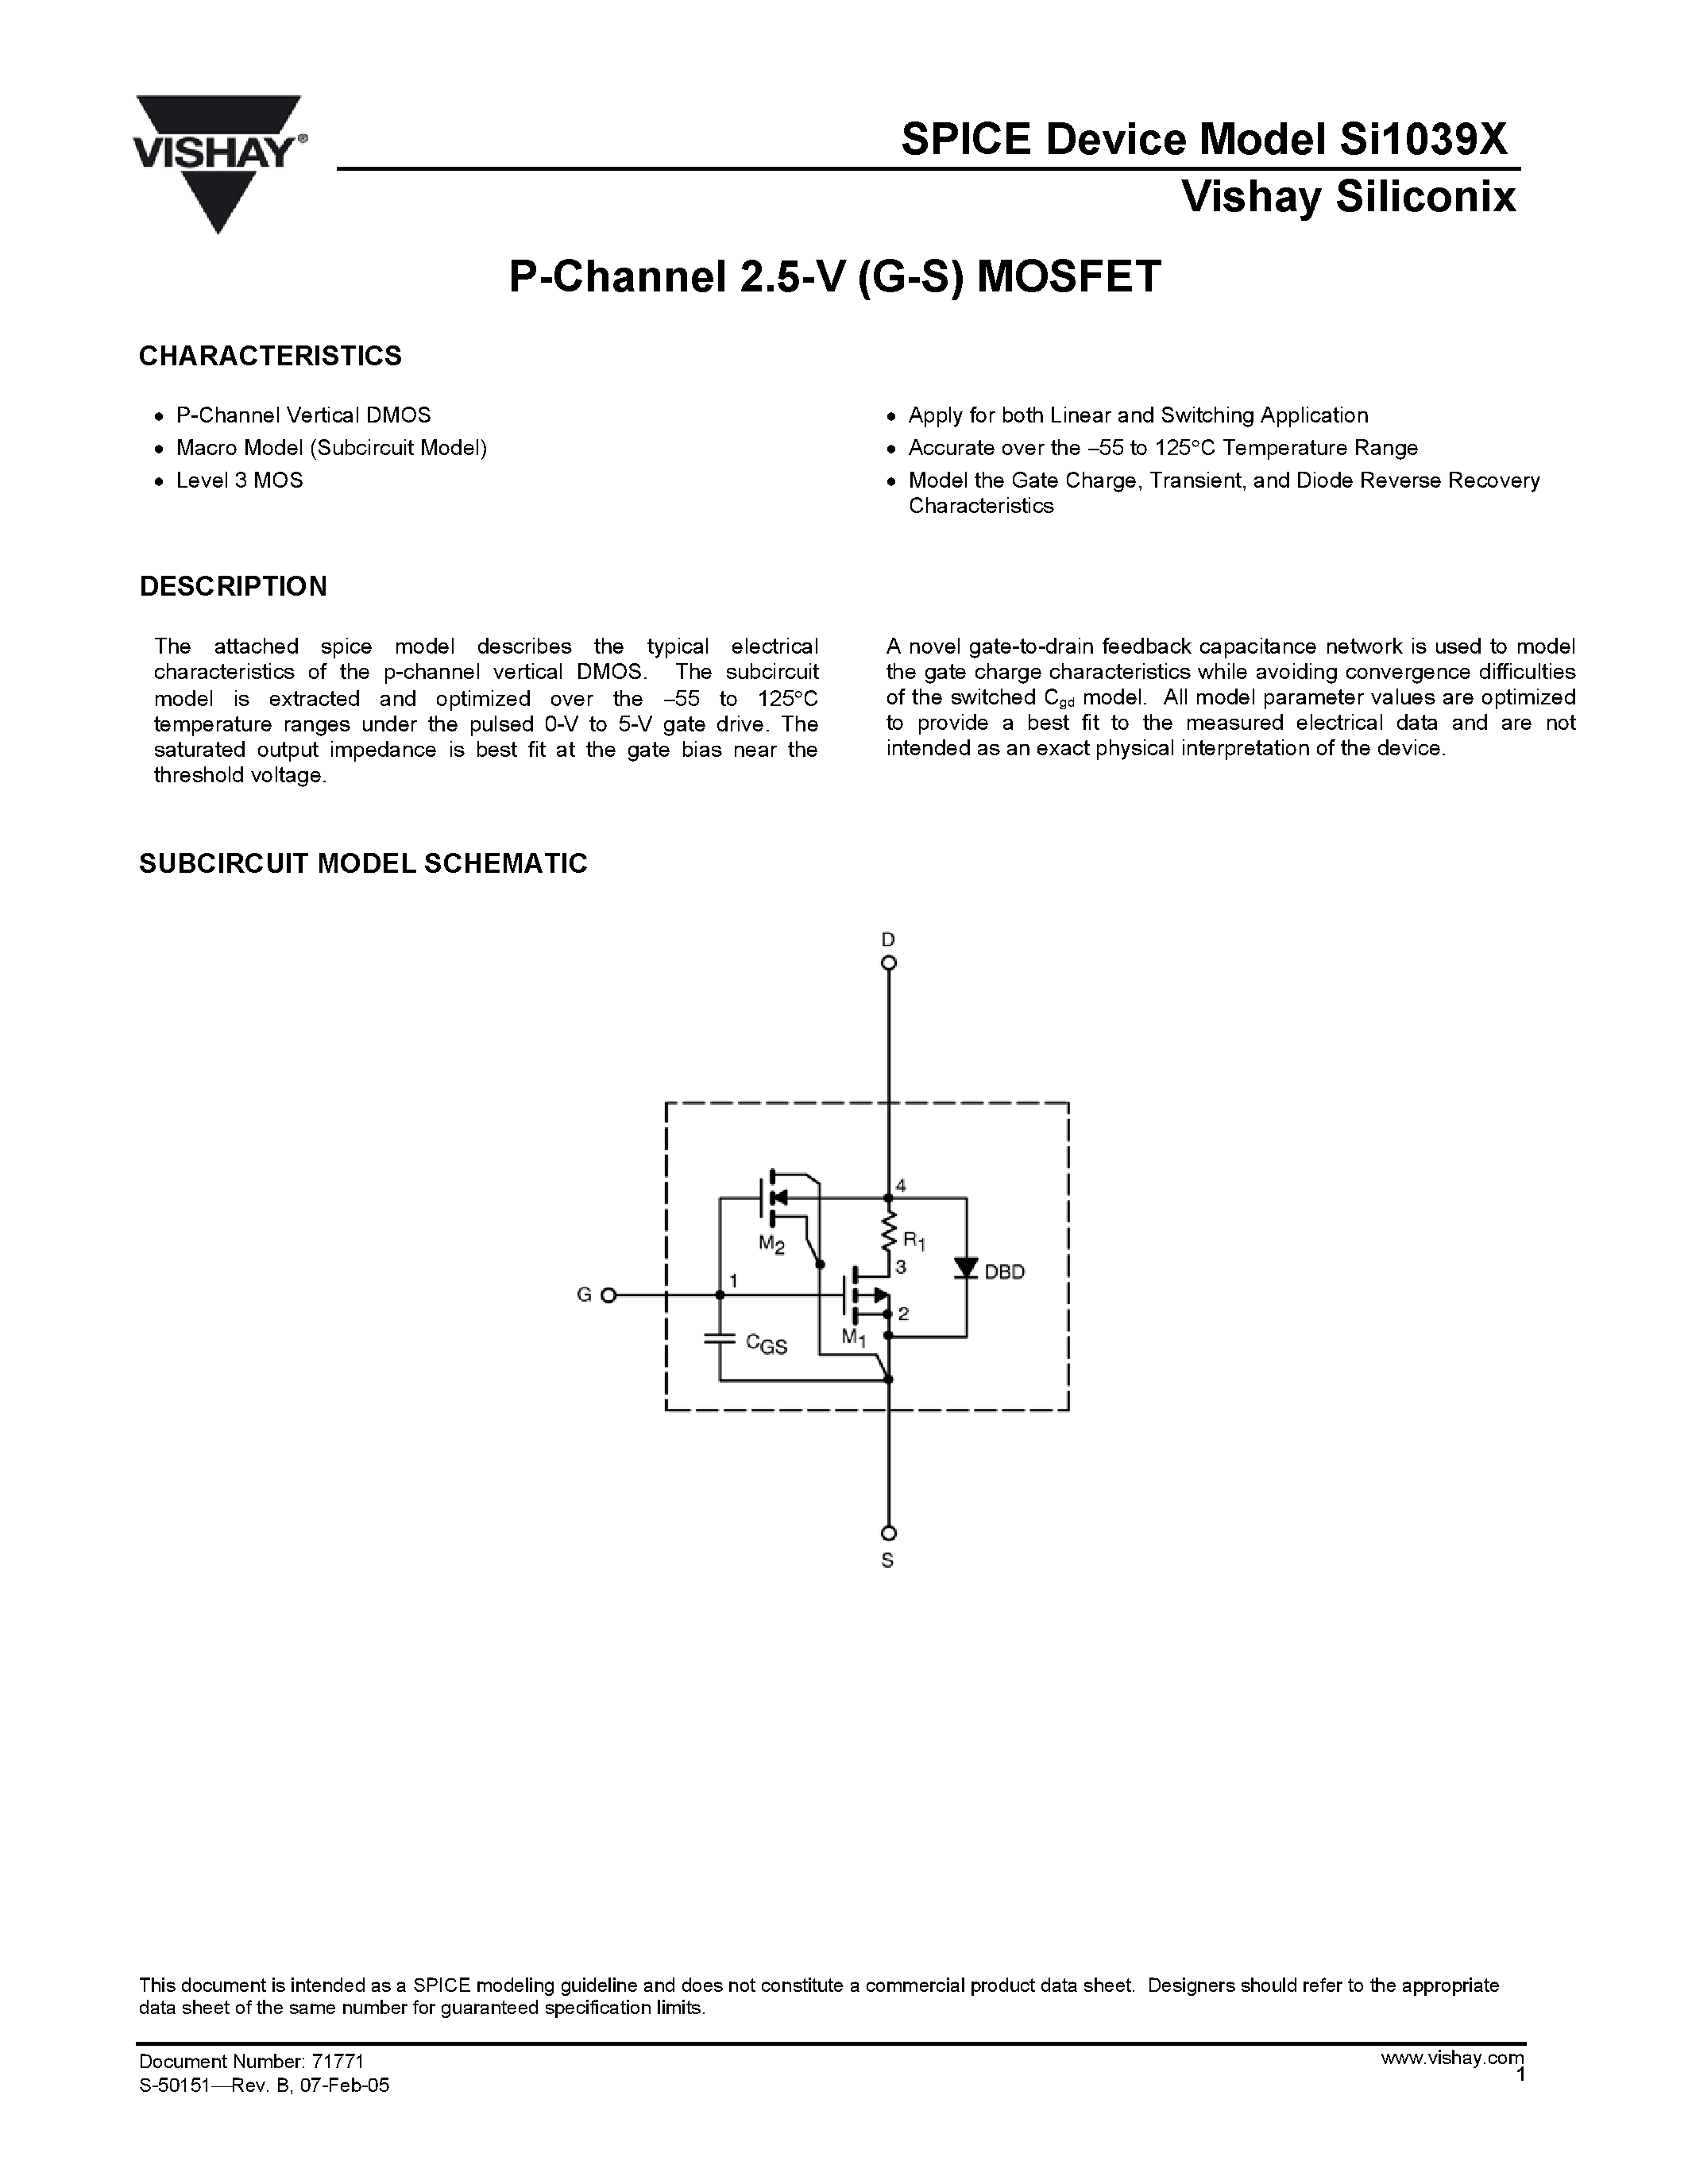 Даташит SI1039X - P-Channel 2.5-V (G-S) MOSFET страница 1